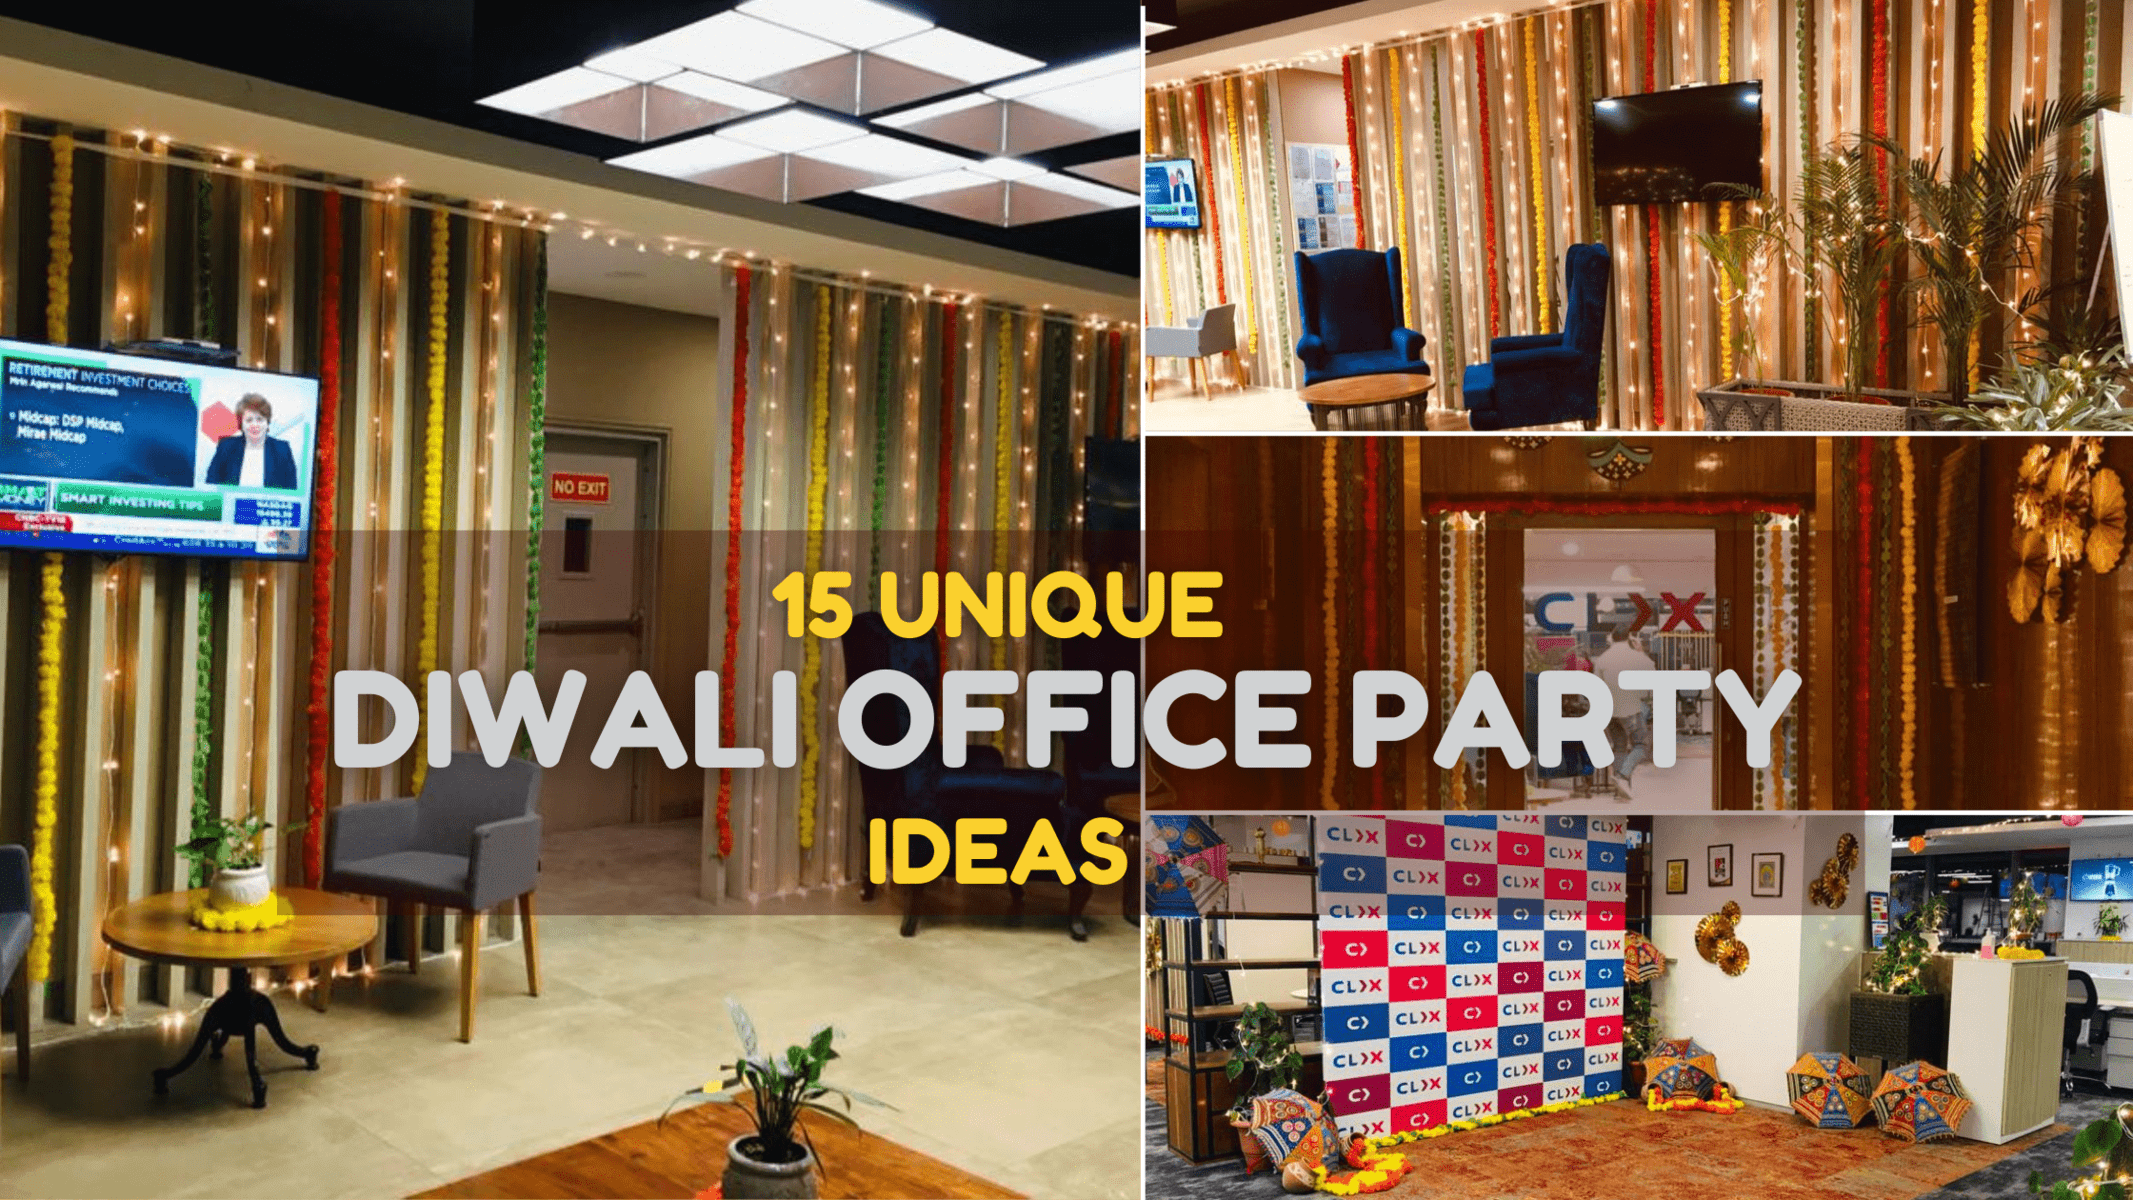 15 Unique Diwali Office Party Ideas- Decorations, Games, Activities, Culinary